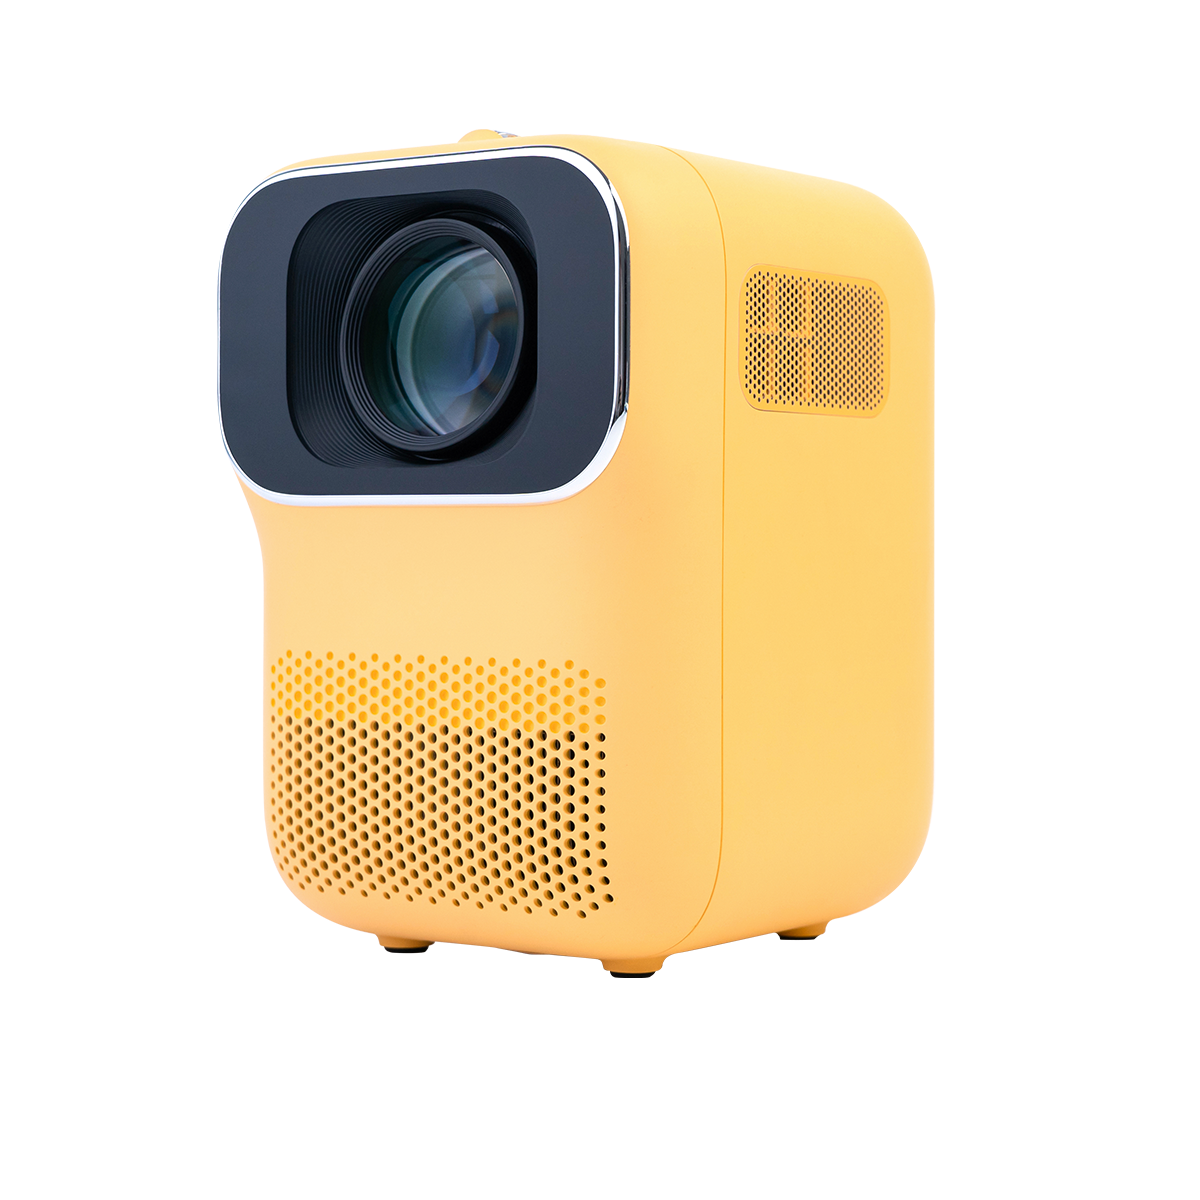 Heyup Boxe Smart Projector - Apply Now for Our Tryout Campaign - Heyup